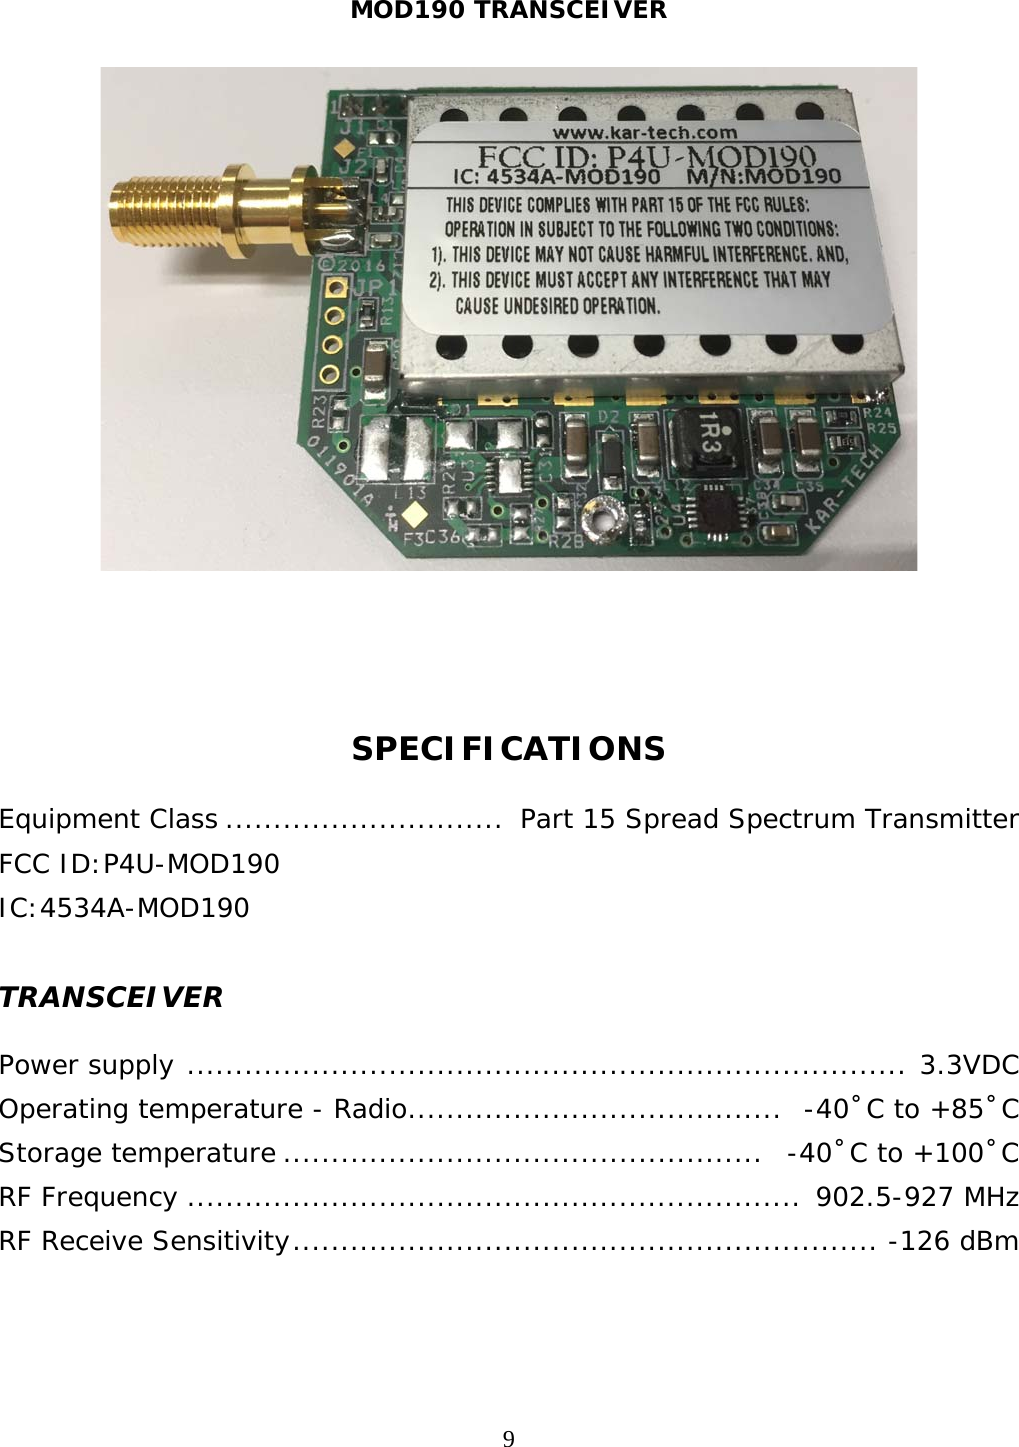 MOD190 TRANSCEIVER  9     SPECIFICATIONS  Equipment Class .............................  Part 15 Spread Spectrum Transmitter FCC ID:P4U-MOD190 IC:4534A-MOD190  TRANSCEIVER  Power supply  ...........................................................................  3.3VDC Operating temperature - Radio .......................................   -40˚C to +85˚C Storage temperature ..................................................   -40˚C to +100˚C RF Frequency ................................................................  902.5-927 MHz RF Receive Sensitivity .............................................................  -126 dBm 